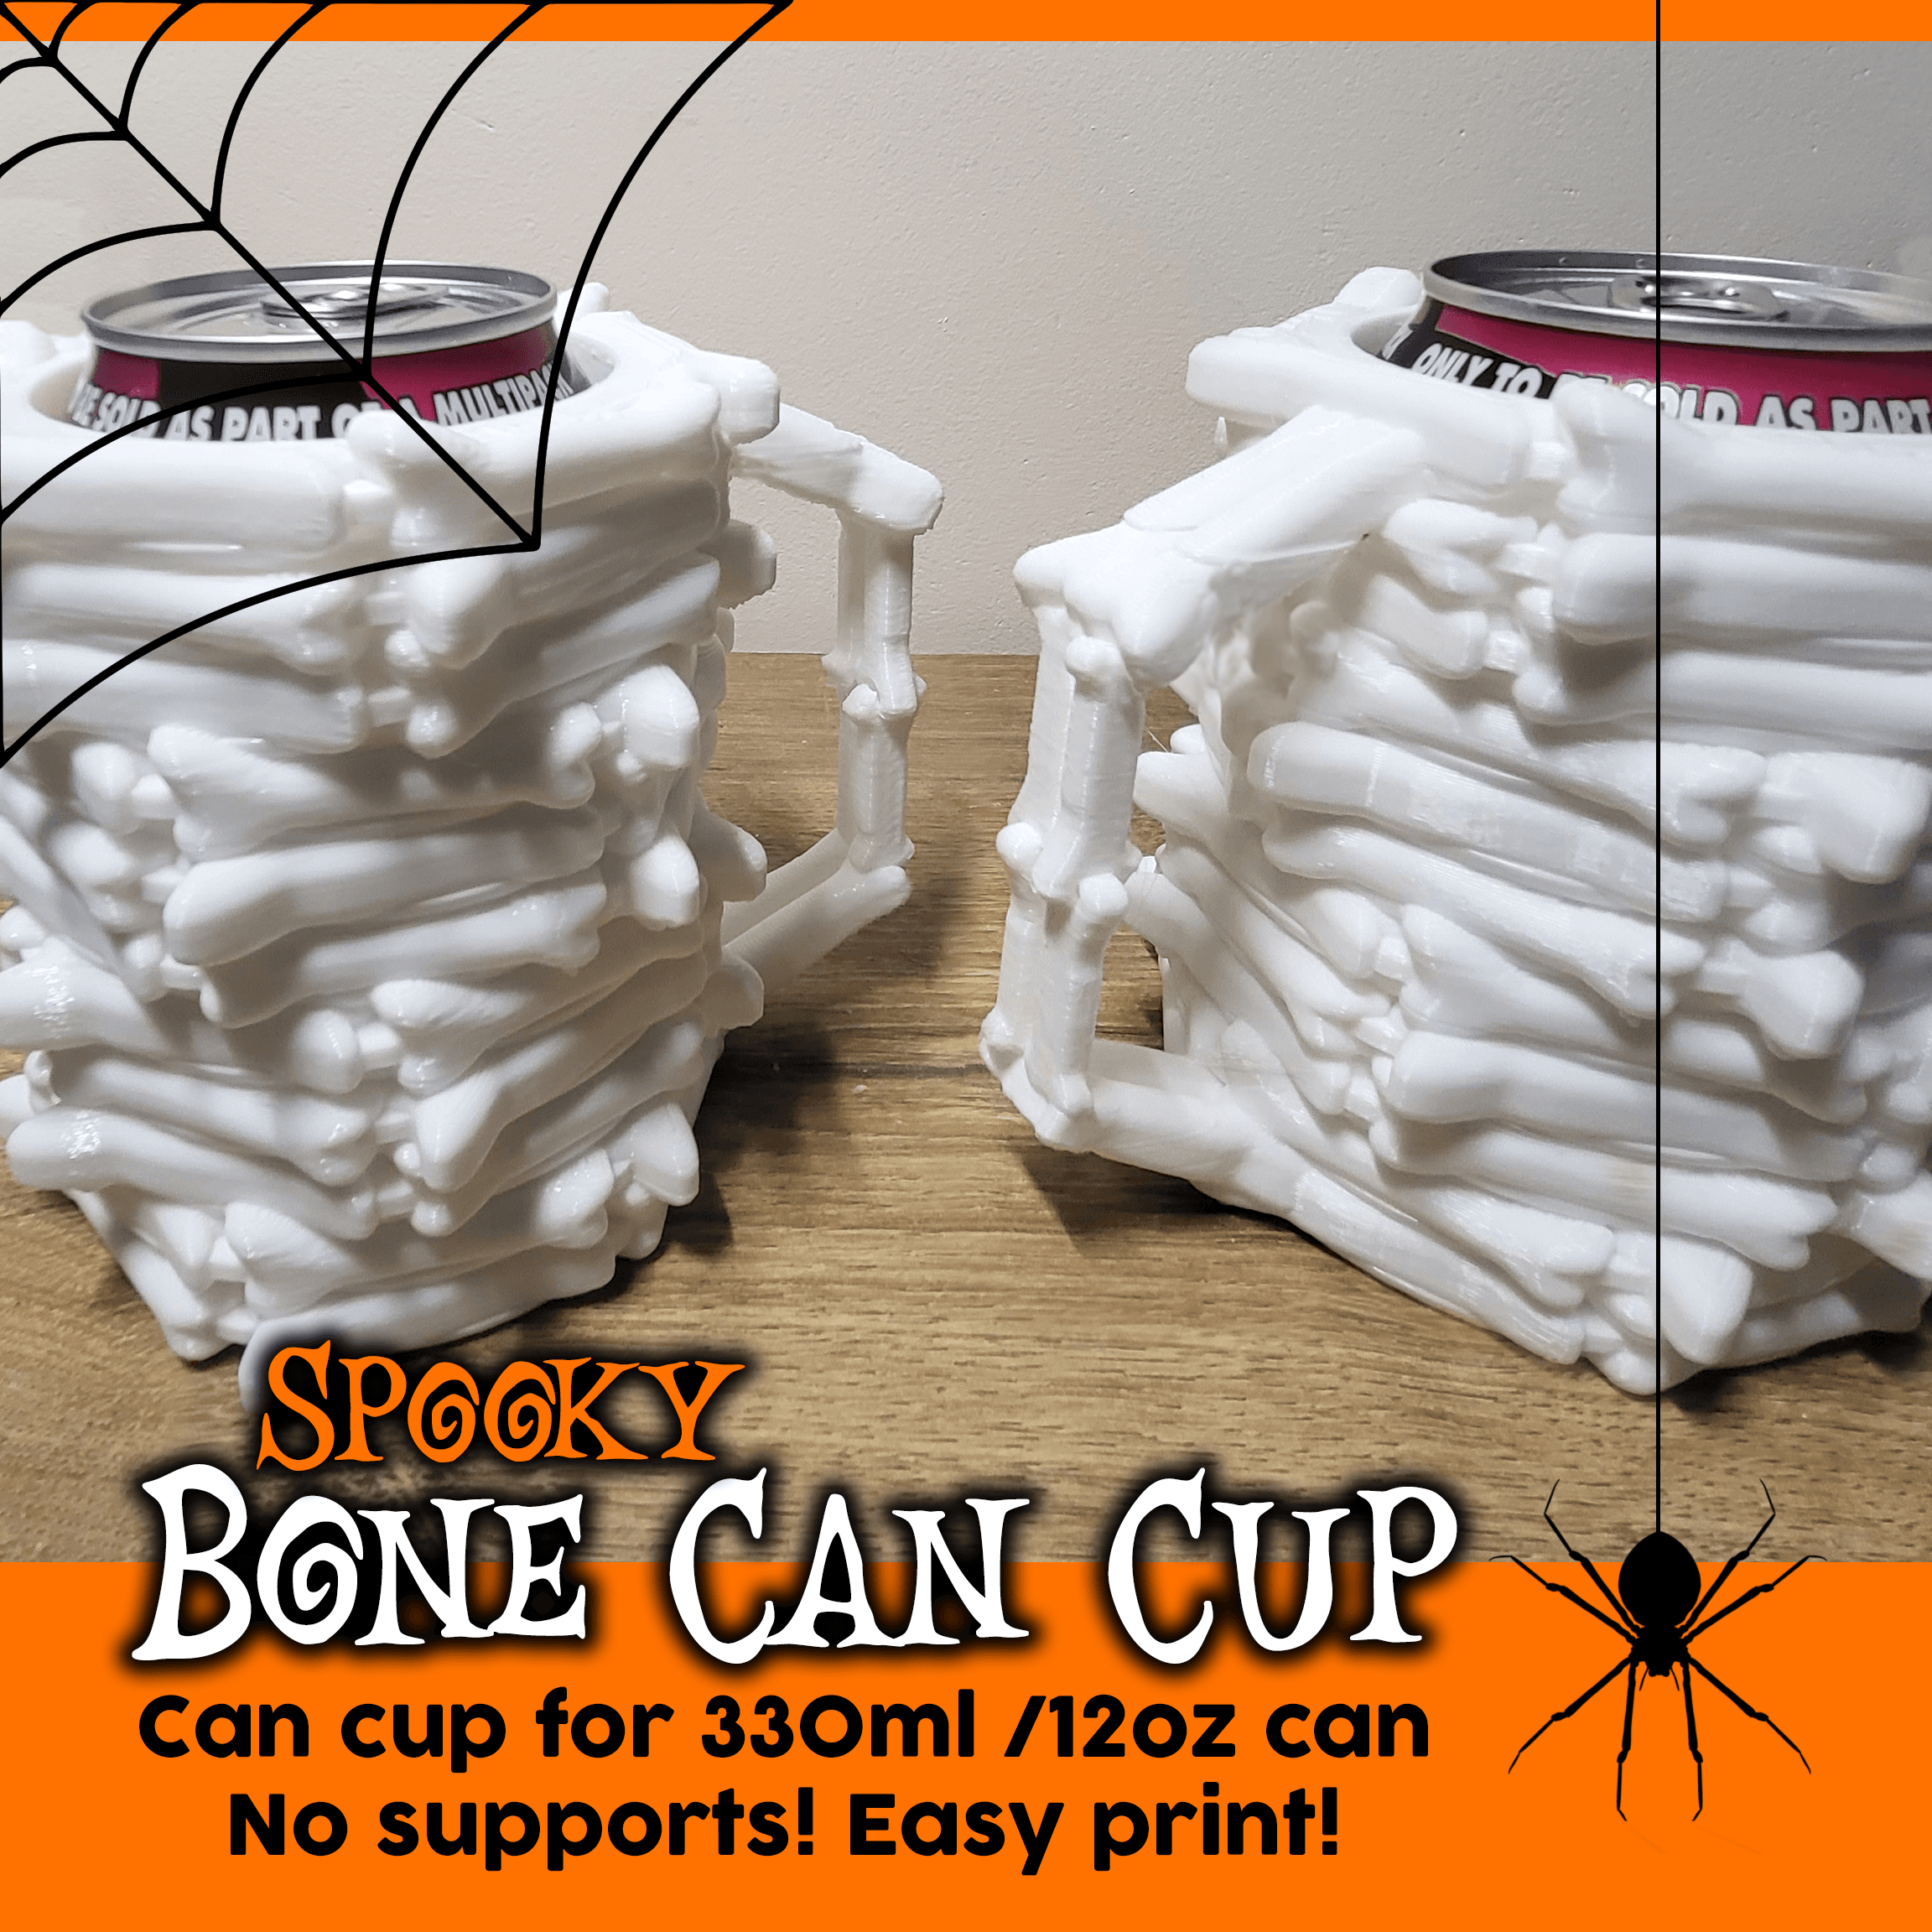 Spooky Bone Mug - Can Cup for 12oz 330ml cans (no supports!) 3d model